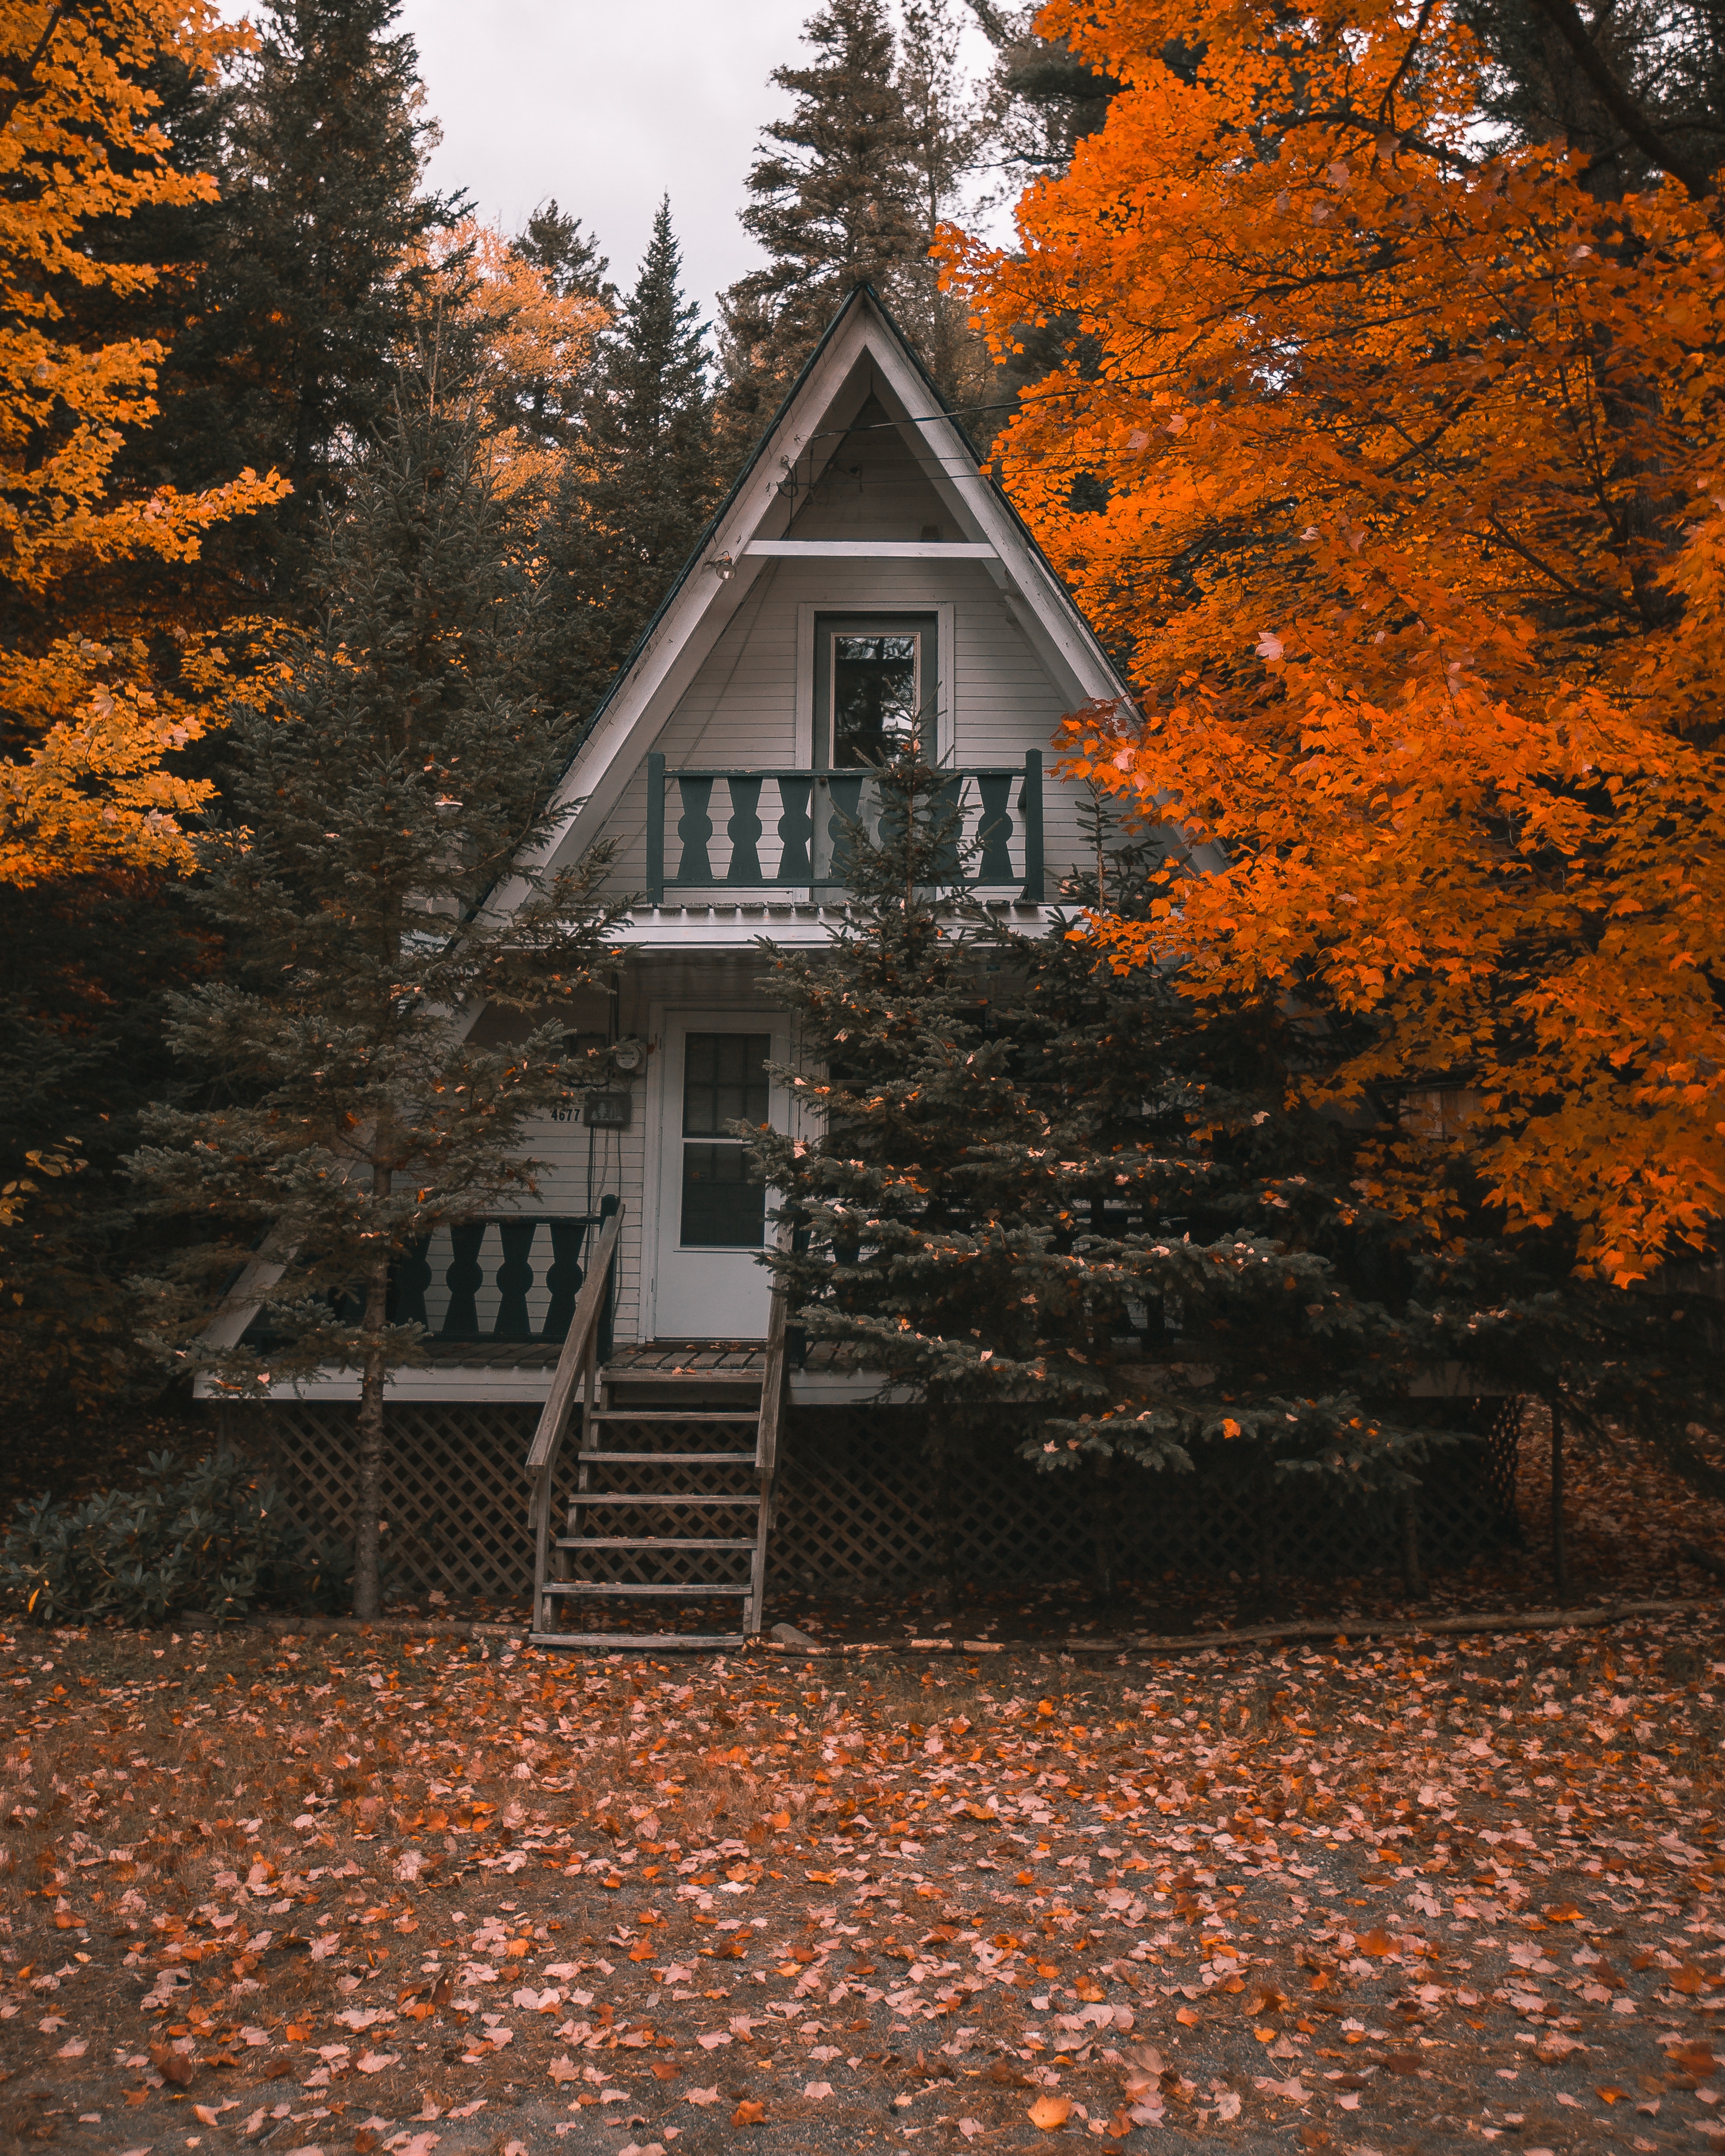 autumn, small house, nature, trees, privacy, seclusion, lodge, coziness, comfort